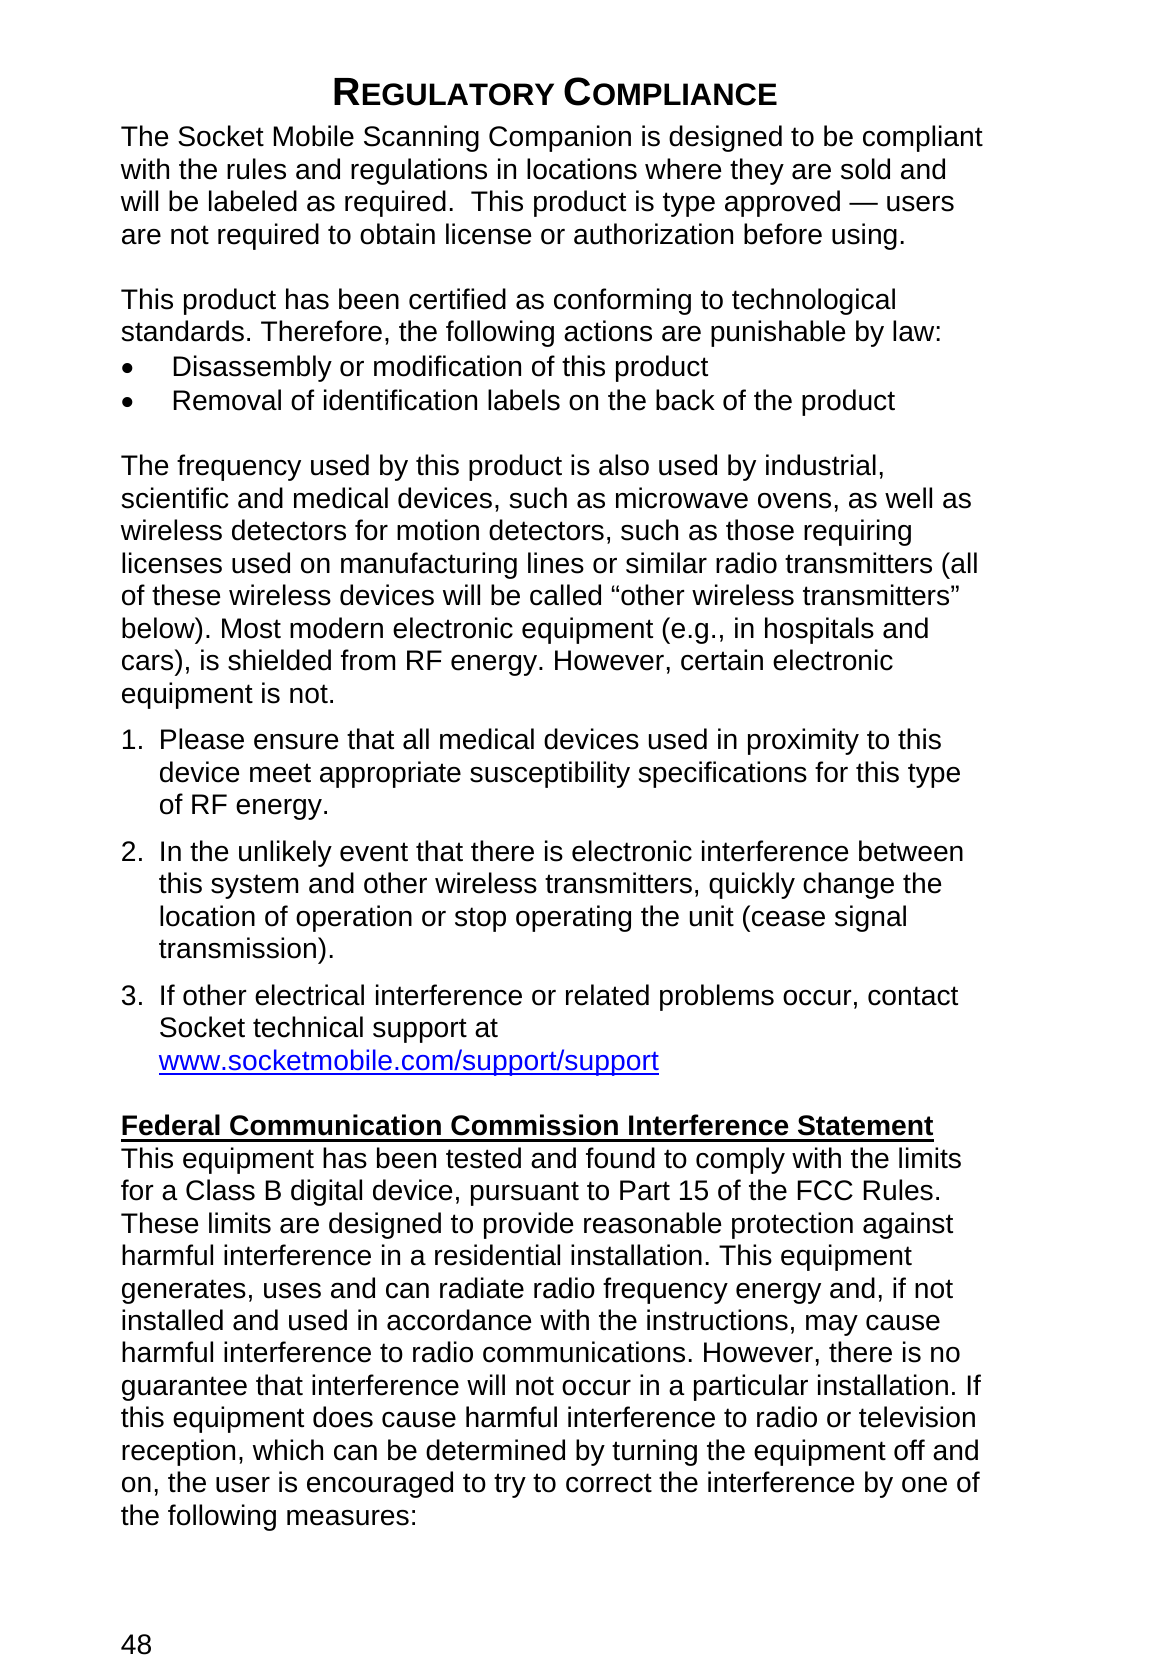 48  REGULATORY COMPLIANCE  The Socket Mobile Scanning Companion is designed to be compliant with the rules and regulations in locations where they are sold and will be labeled as required.  This product is type approved — users are not required to obtain license or authorization before using.  This product has been certified as conforming to technological standards. Therefore, the following actions are punishable by law: •  Disassembly or modification of this product •  Removal of identification labels on the back of the product  The frequency used by this product is also used by industrial, scientific and medical devices, such as microwave ovens, as well as wireless detectors for motion detectors, such as those requiring licenses used on manufacturing lines or similar radio transmitters (all of these wireless devices will be called “other wireless transmitters” below). Most modern electronic equipment (e.g., in hospitals and cars), is shielded from RF energy. However, certain electronic equipment is not. 1.  Please ensure that all medical devices used in proximity to this device meet appropriate susceptibility specifications for this type of RF energy. 2.  In the unlikely event that there is electronic interference between this system and other wireless transmitters, quickly change the location of operation or stop operating the unit (cease signal transmission). 3.  If other electrical interference or related problems occur, contact Socket technical support at www.socketmobile.com/support/support  Federal Communication Commission Interference Statement This equipment has been tested and found to comply with the limits for a Class B digital device, pursuant to Part 15 of the FCC Rules. These limits are designed to provide reasonable protection against harmful interference in a residential installation. This equipment generates, uses and can radiate radio frequency energy and, if not installed and used in accordance with the instructions, may cause harmful interference to radio communications. However, there is no guarantee that interference will not occur in a particular installation. If this equipment does cause harmful interference to radio or television reception, which can be determined by turning the equipment off and on, the user is encouraged to try to correct the interference by one of the following measures:  